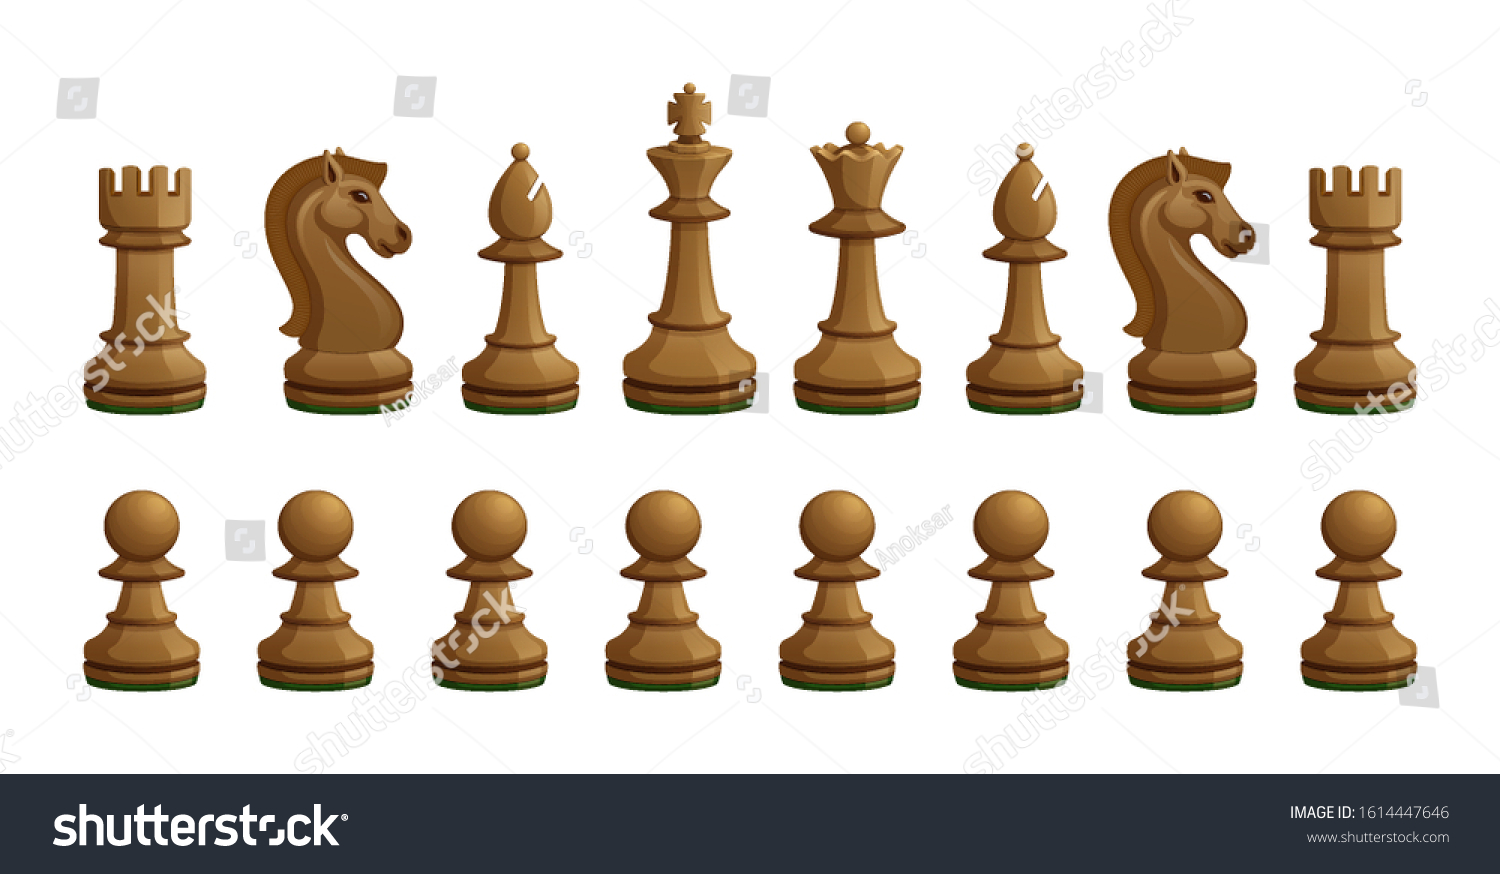 SVG of All wooden chess pieces isolated on the white background. Set including the king, queen, bishop, knight, rook and pawns. svg